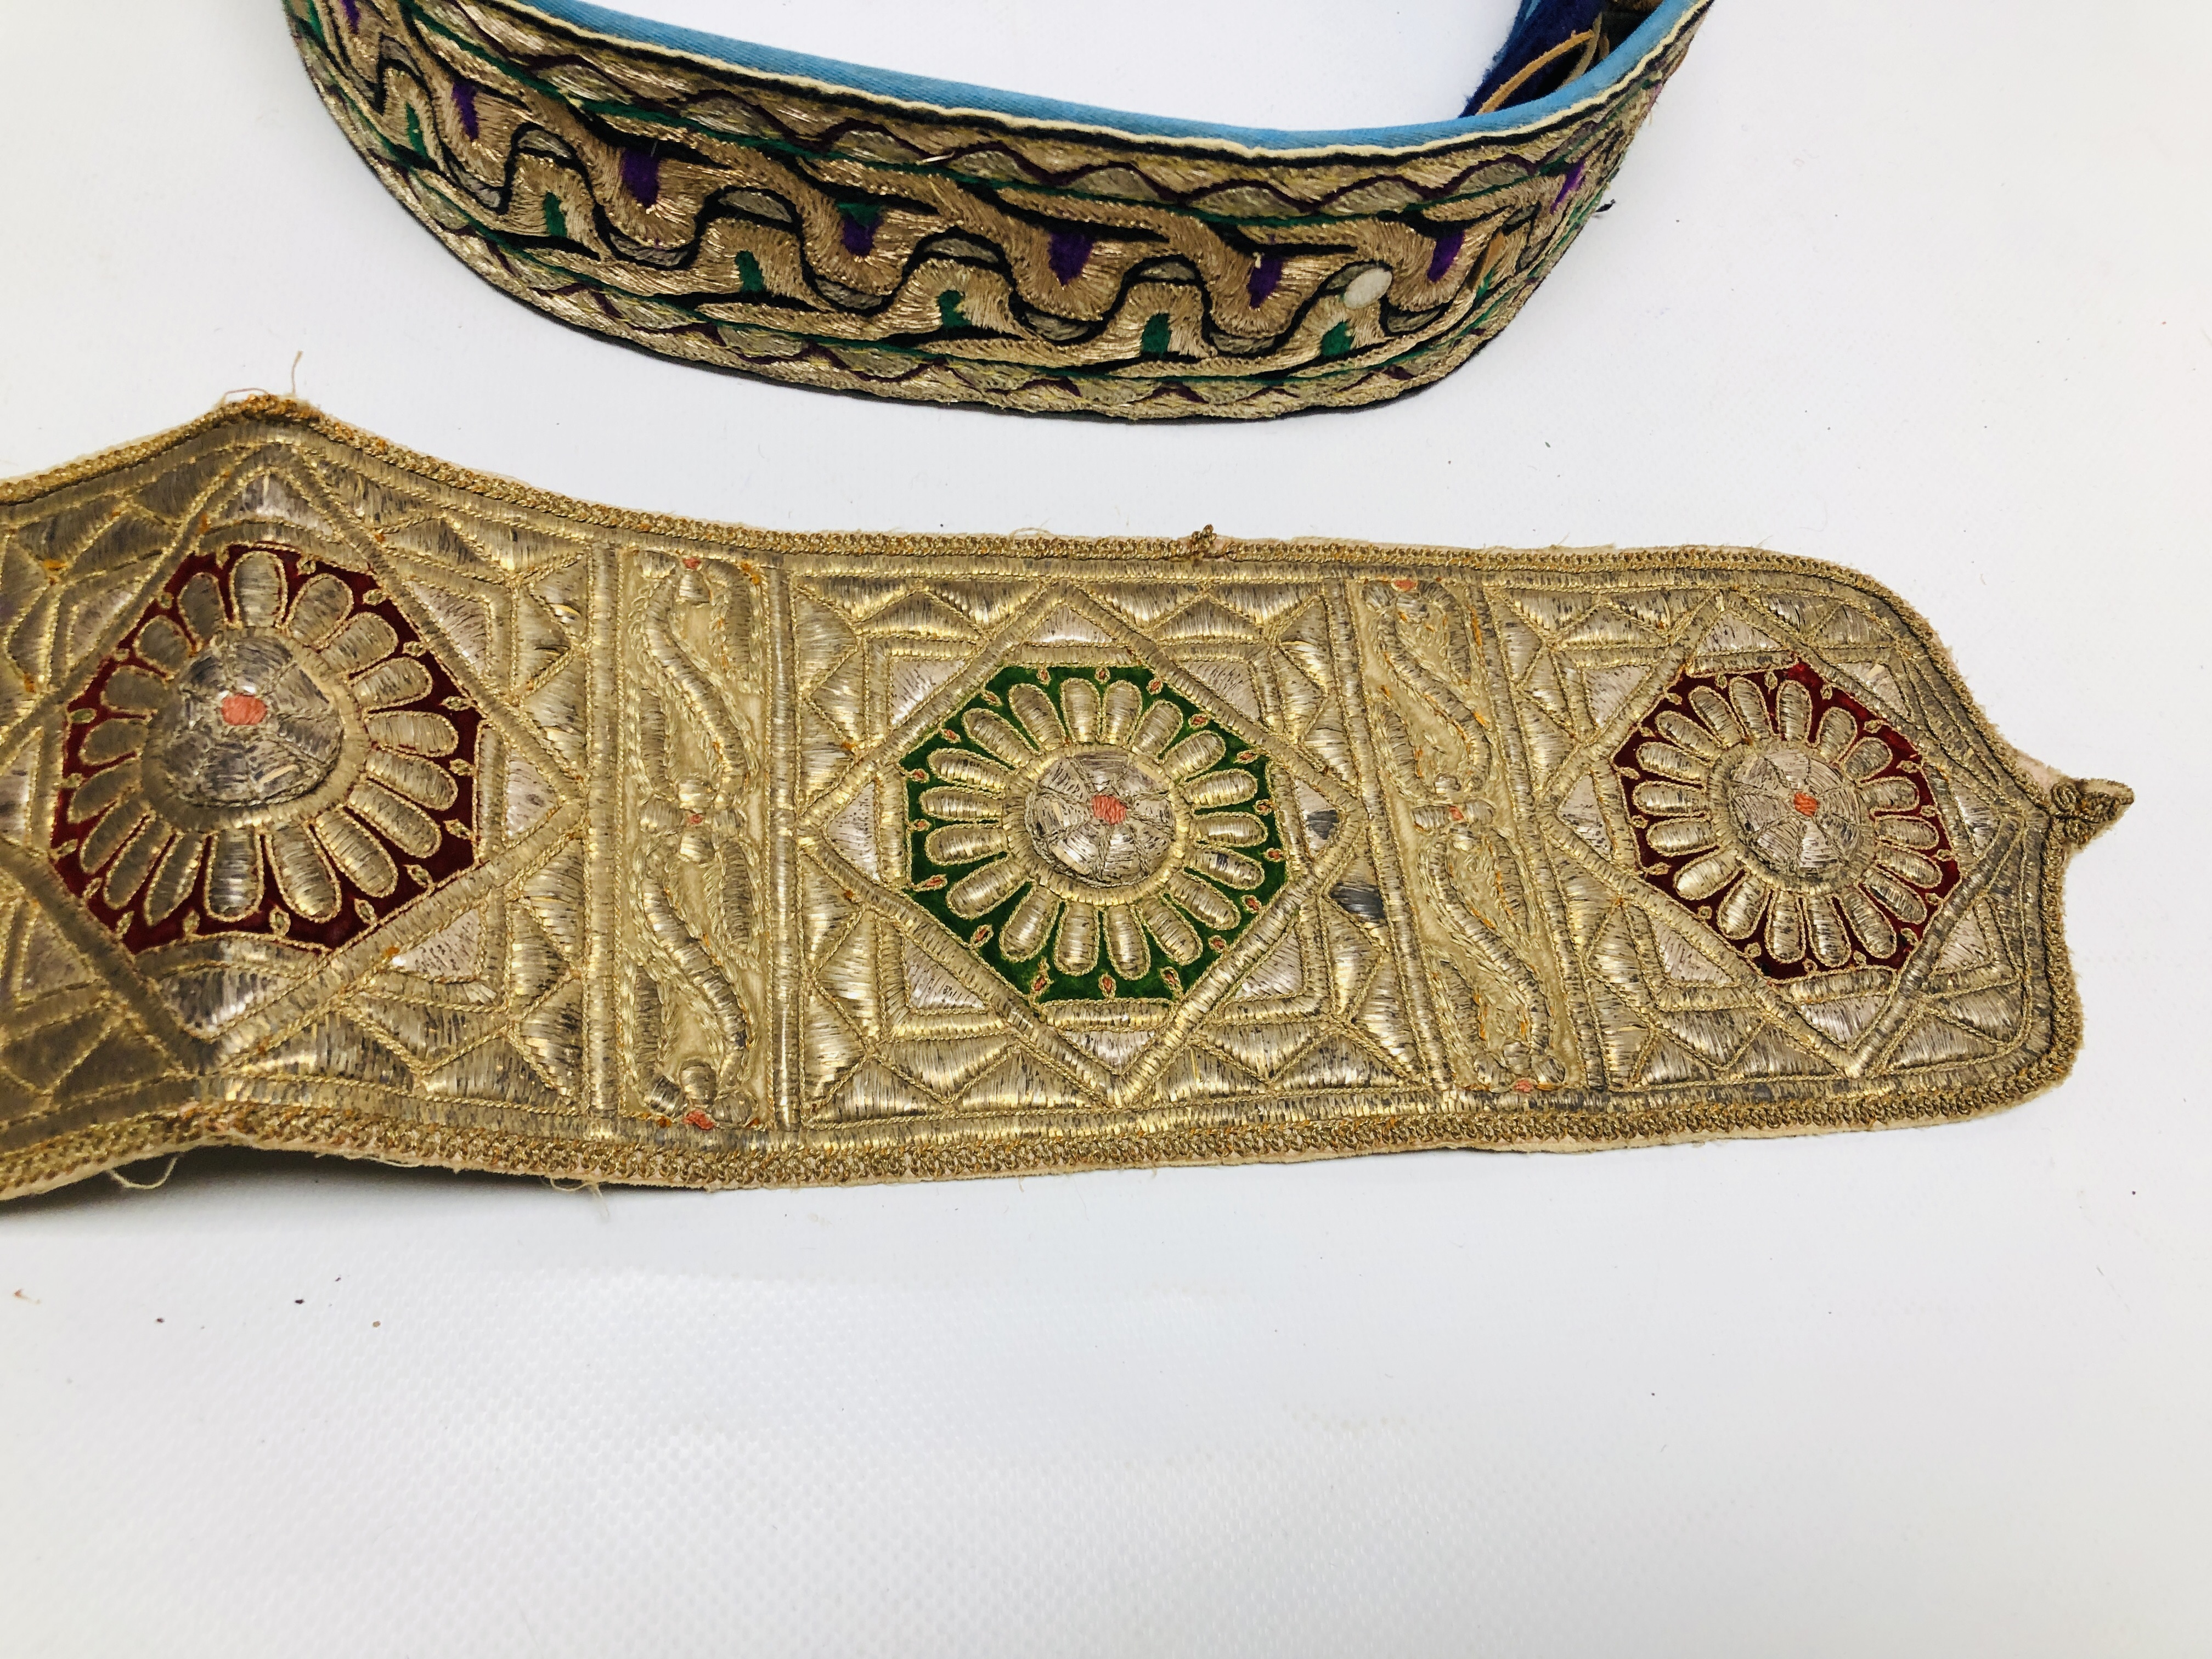 TWO MIDDLE EASTERN WOVEN BELTS ALONG WITH A VINTAGE METAL WORK THREADED PANEL - Image 3 of 11